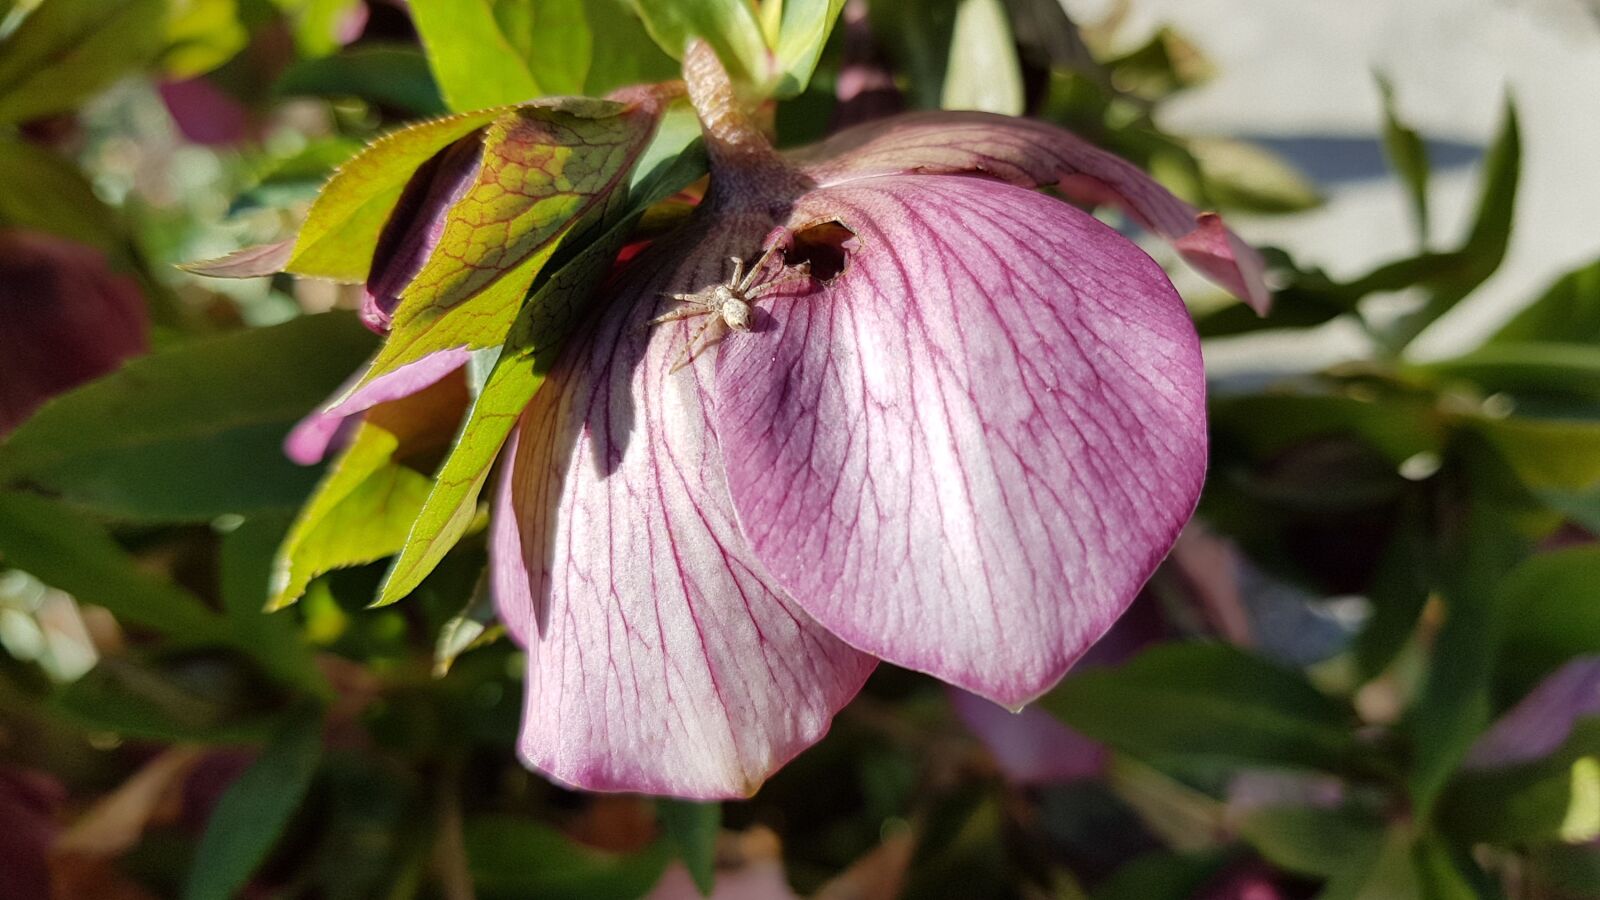 Samsung Galaxy S7 sample photo. Christmas rose, flower, spider photography